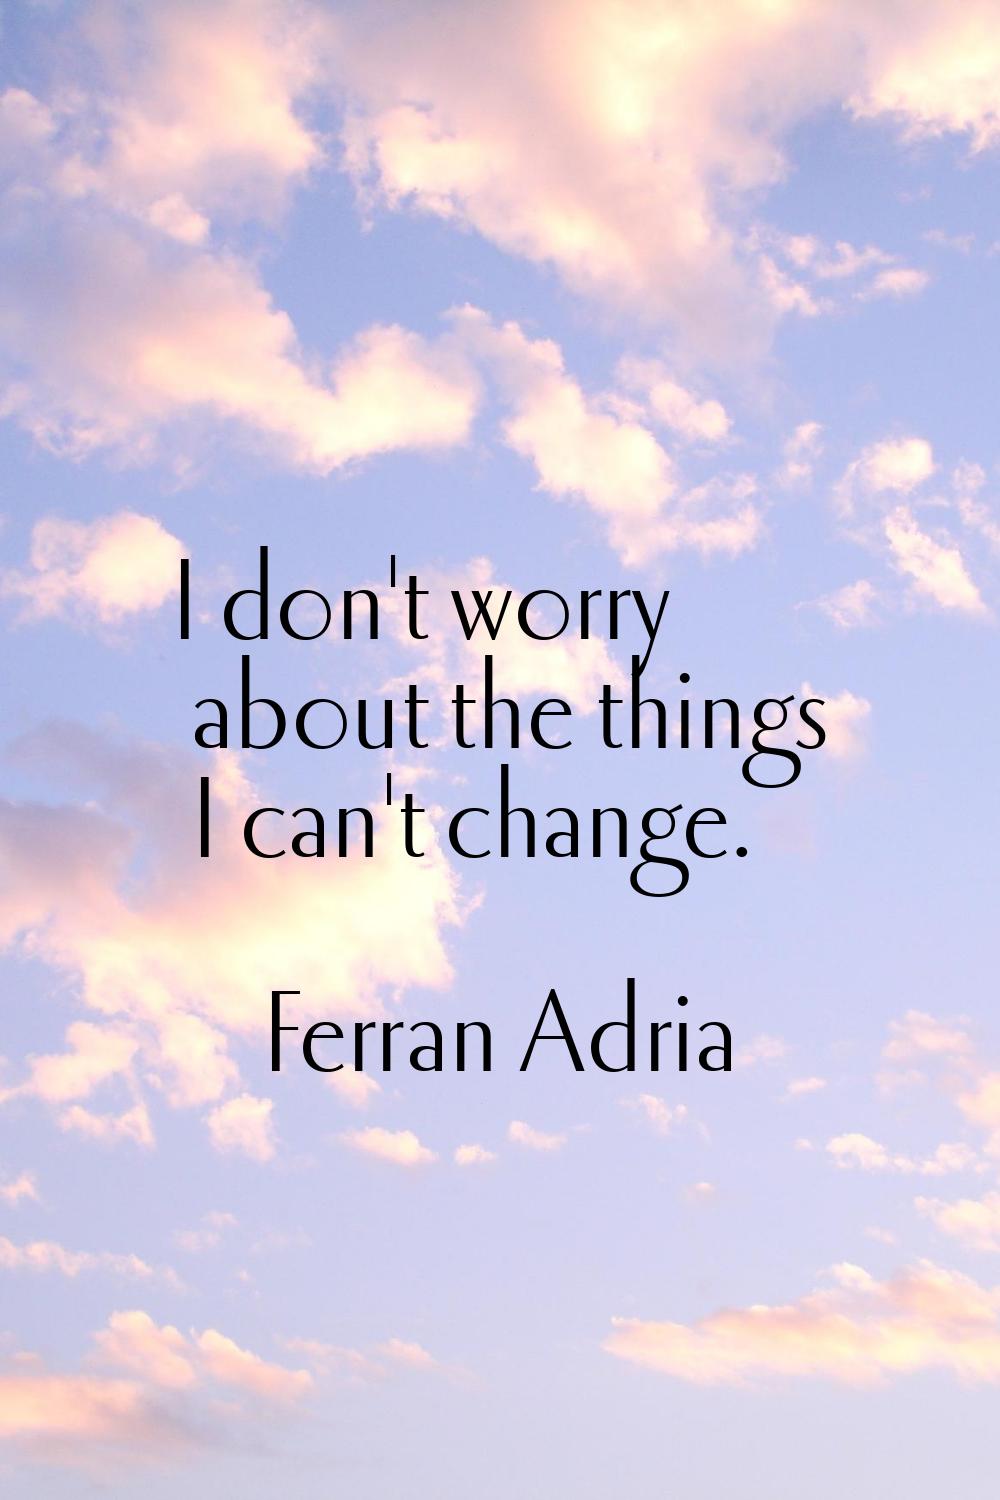 I don't worry about the things I can't change.